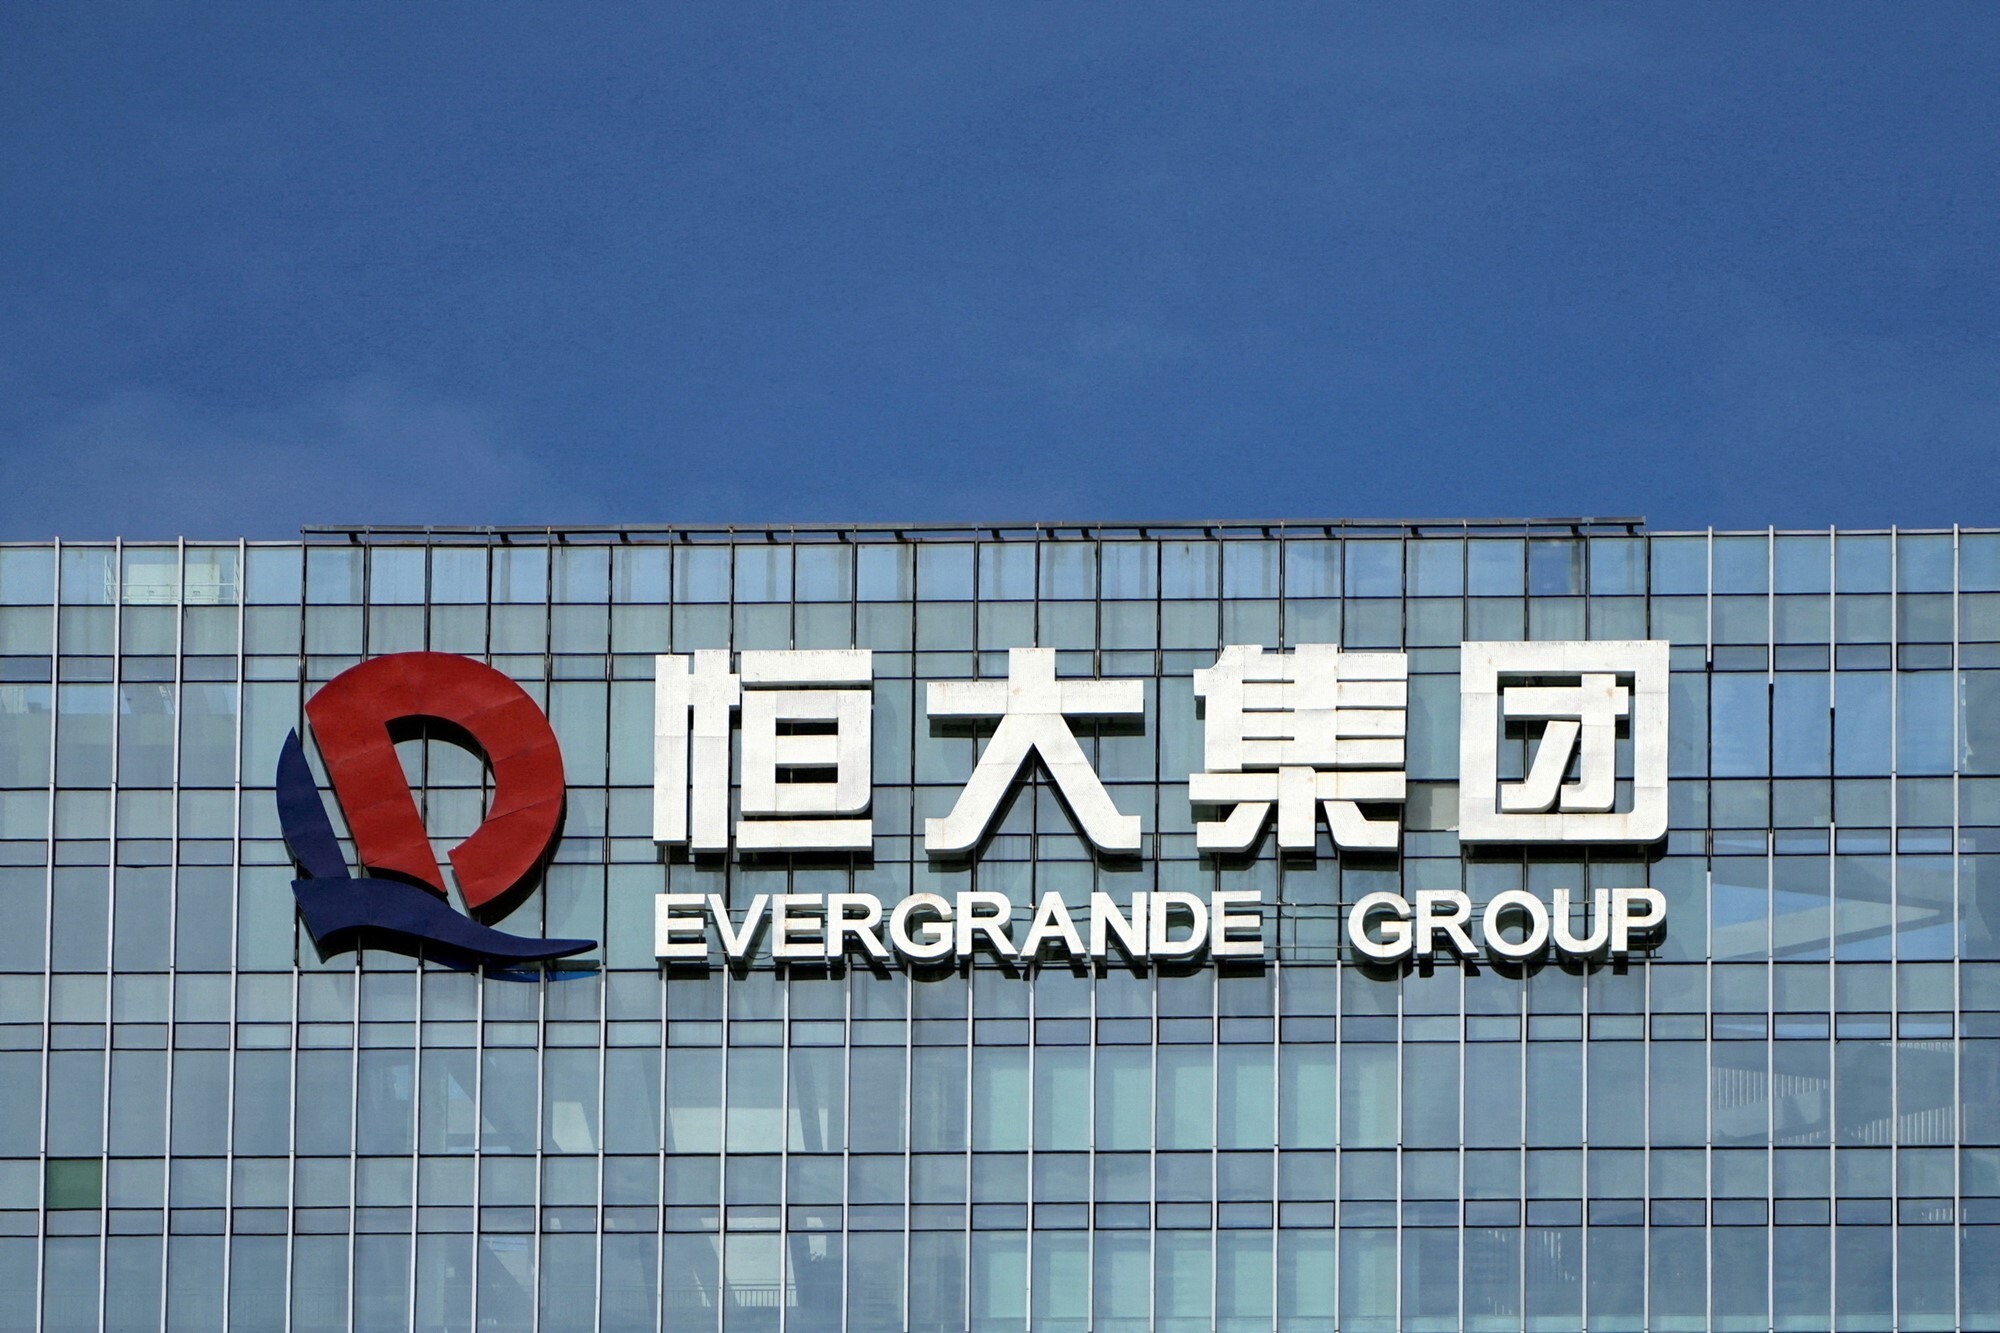 The Evergrande Group logo and name on the glass walls of an office building